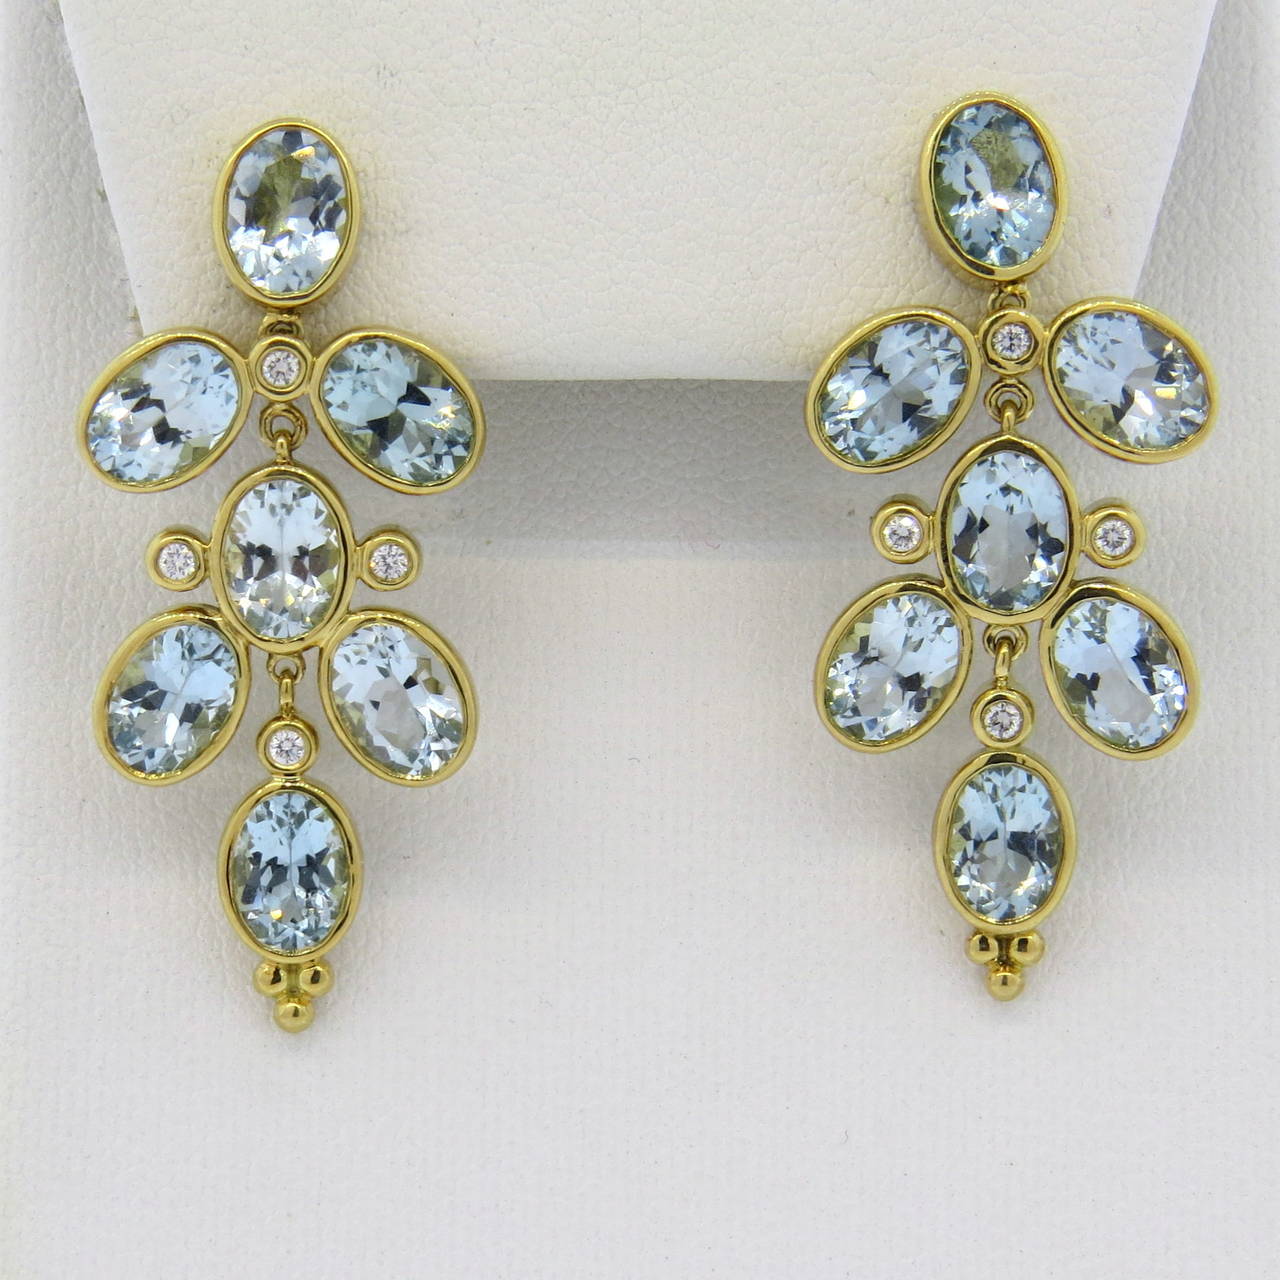 18k gold drop earrings by Temple St. Clair, featuring oval aquamarine gemstones and approx. 0.12ctw in G/VS diamonds. Earrings measure 40mm x 18mm. Marked 750 and with Temple hallmark. Weight - 14.6 grams and retail for $5500